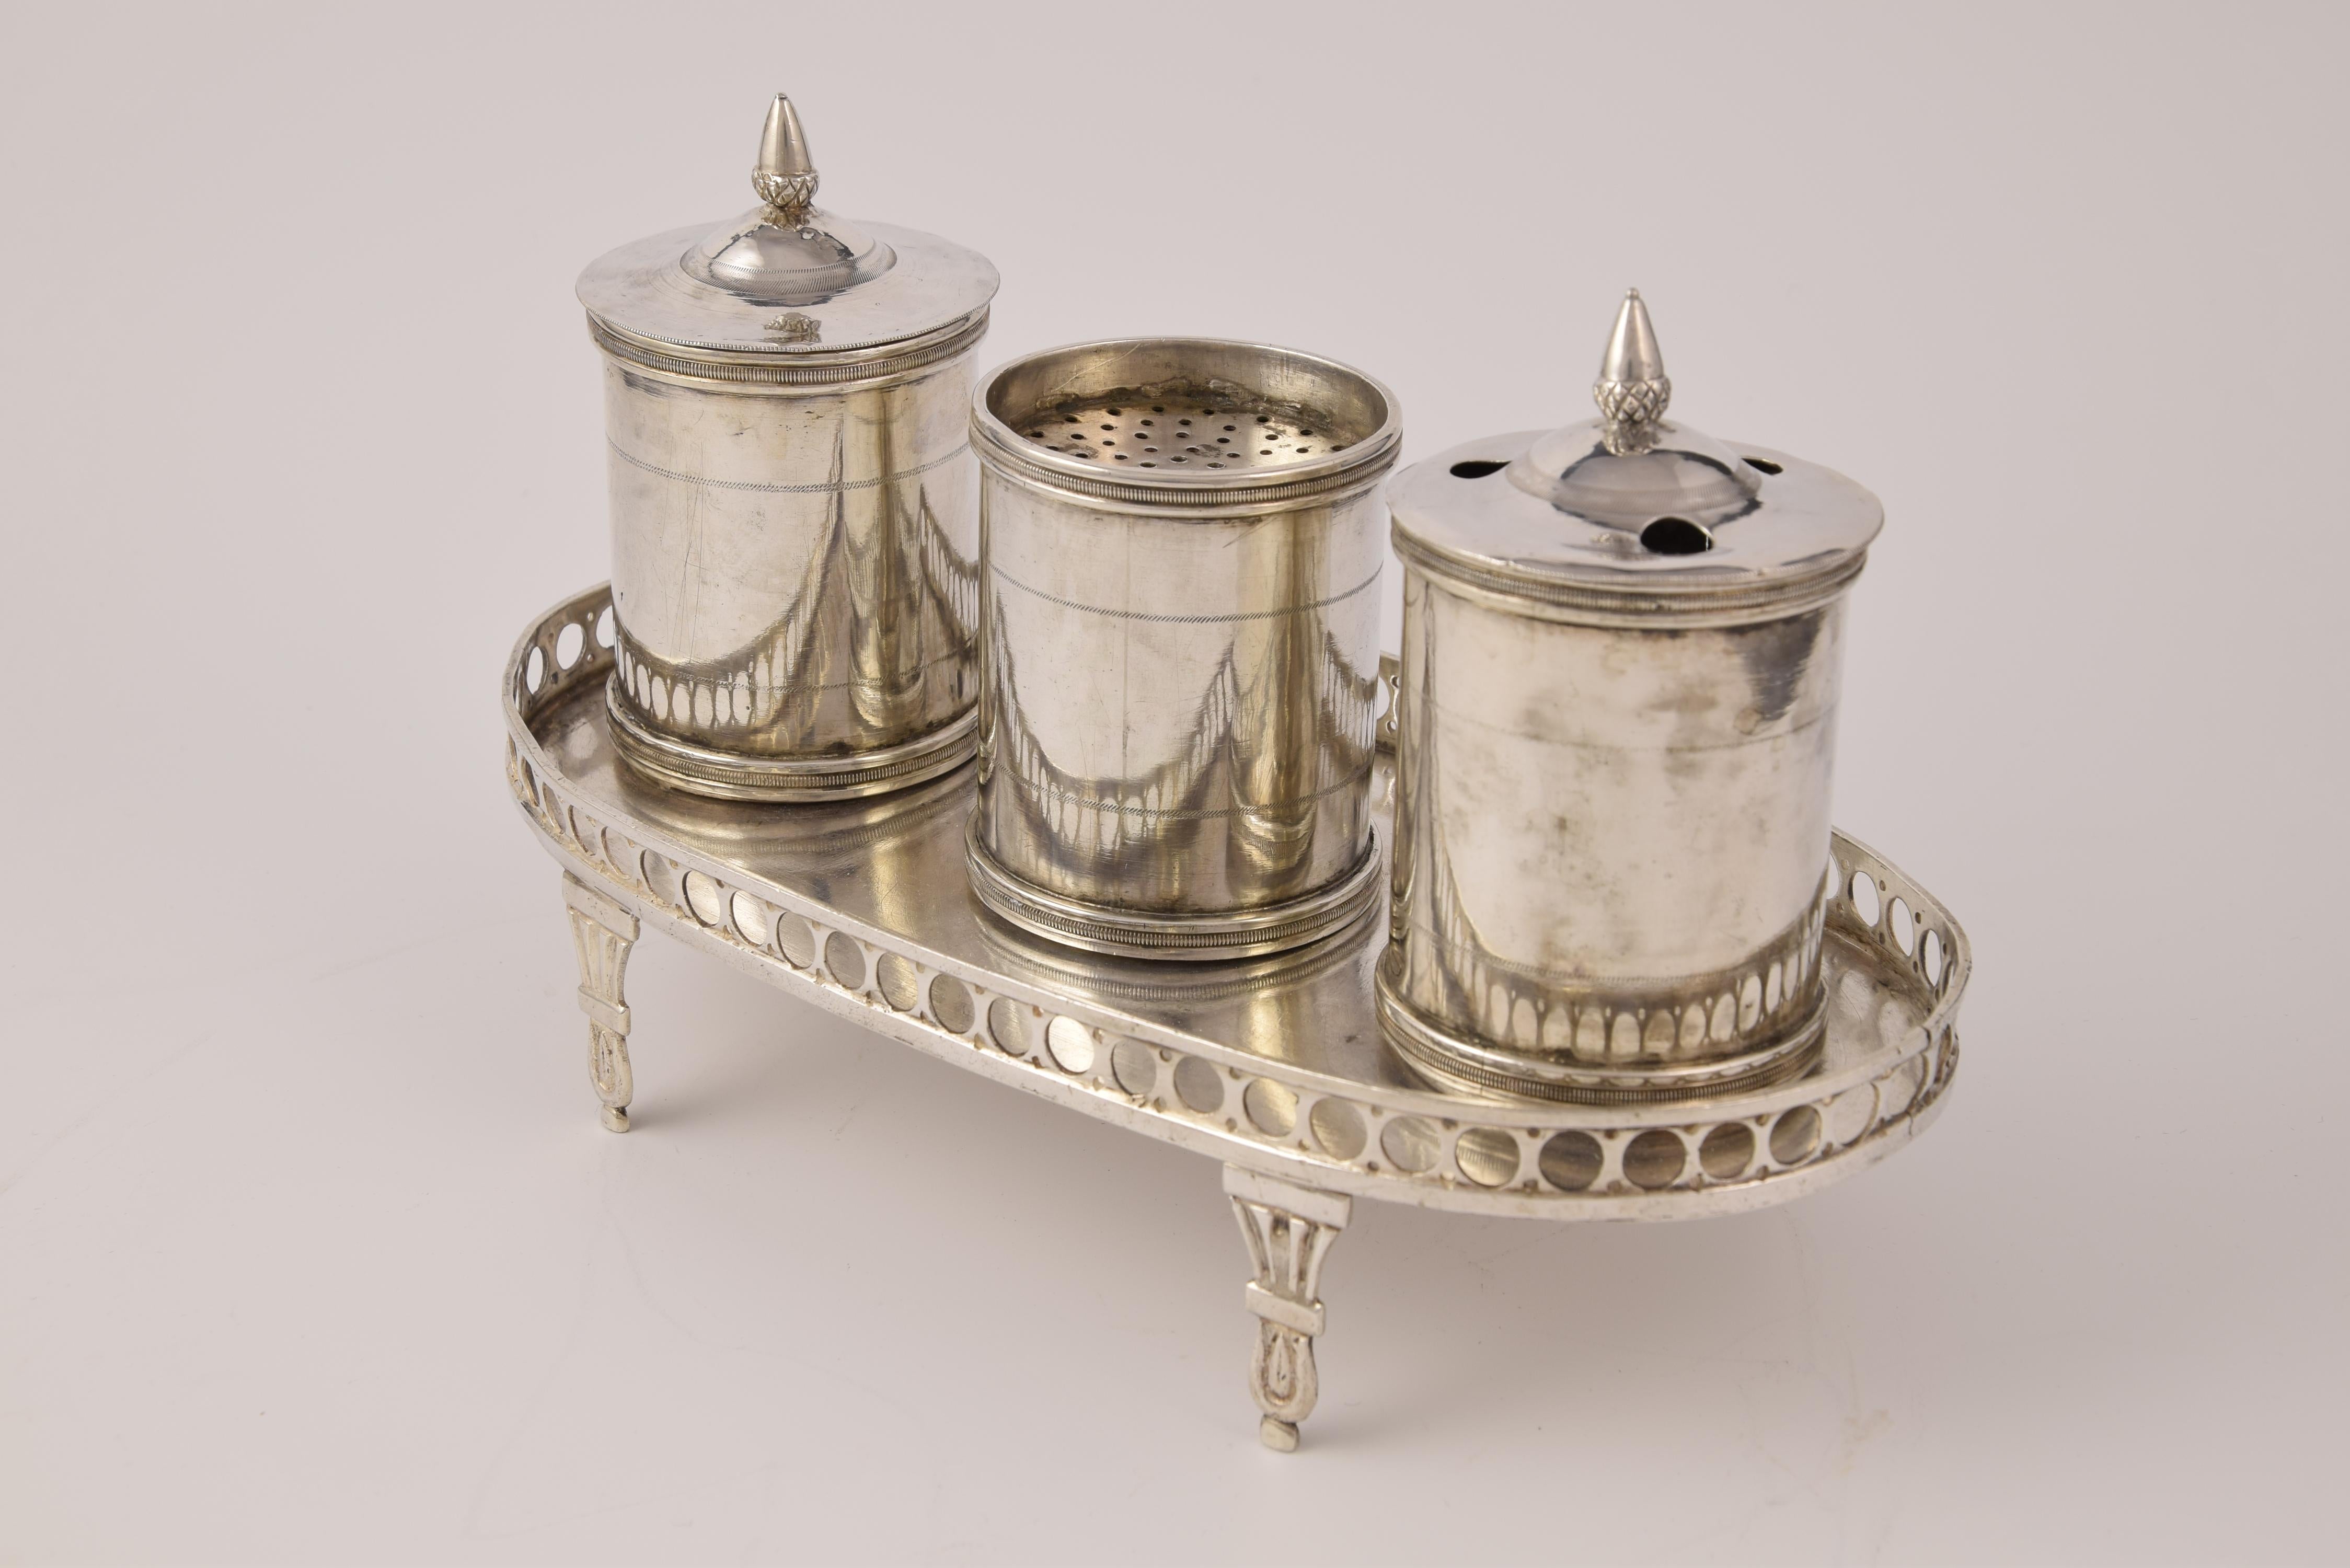 With hallmarks.
On an oval tray decorated with an openwork balustrade, are placed various items: the inkwell, the sandpit and container with lid holed to let the feathers on, all similar and decorated very simply with inspiration from the